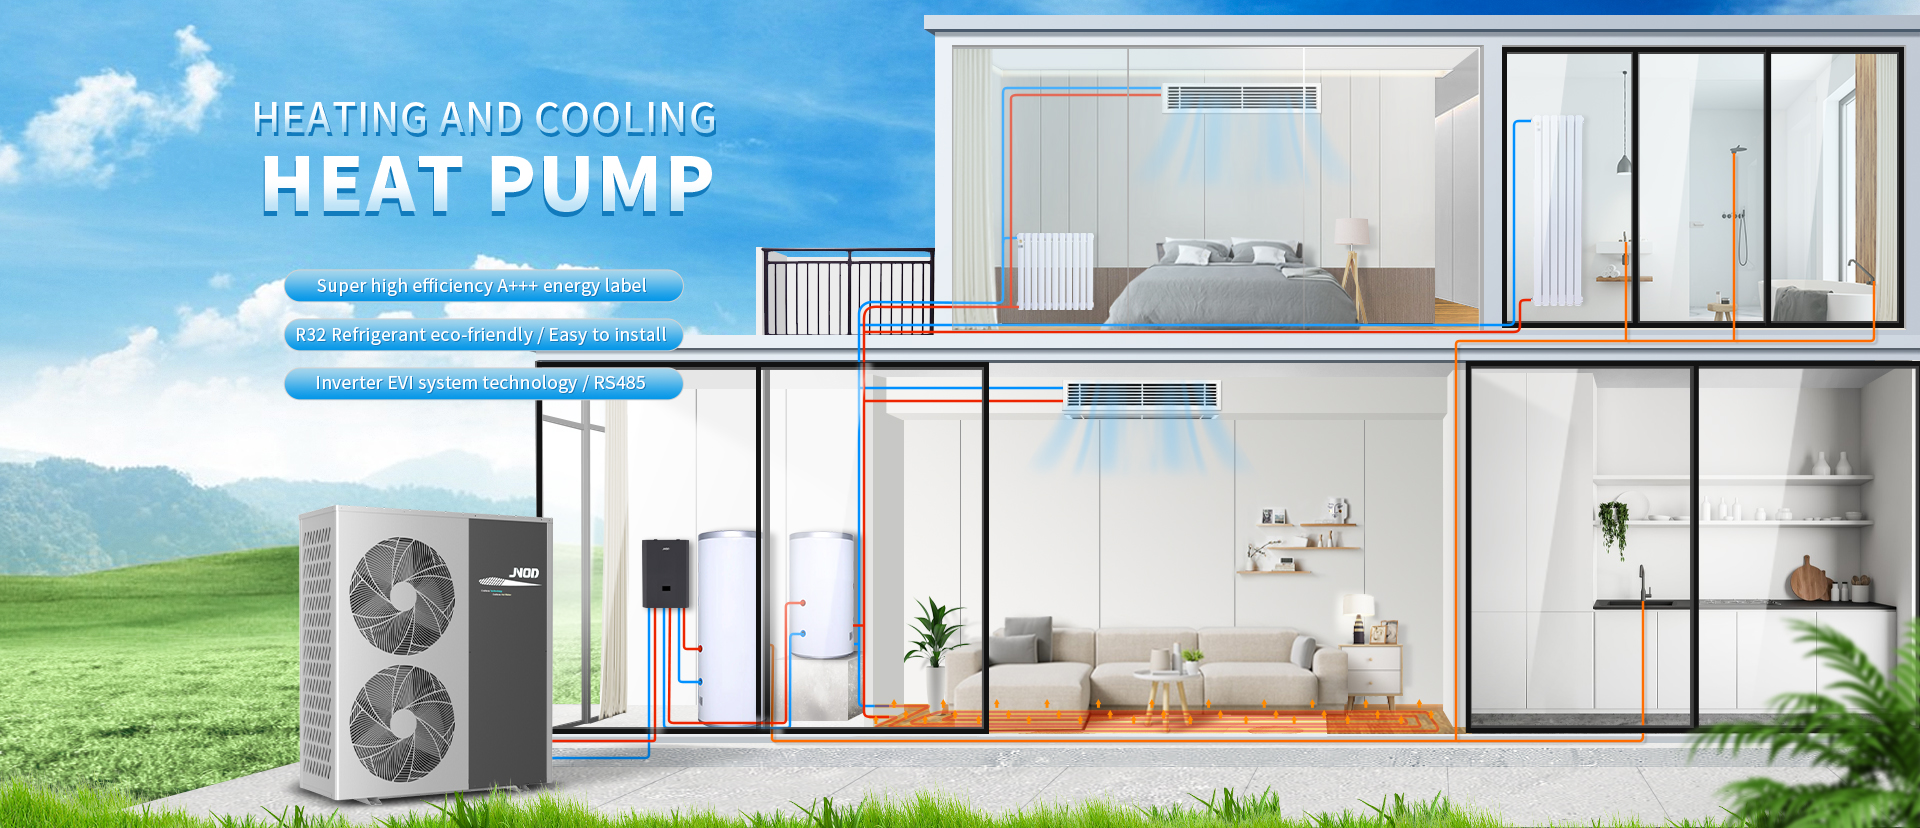 Air Cooled Heating And Cooling Heat Pump